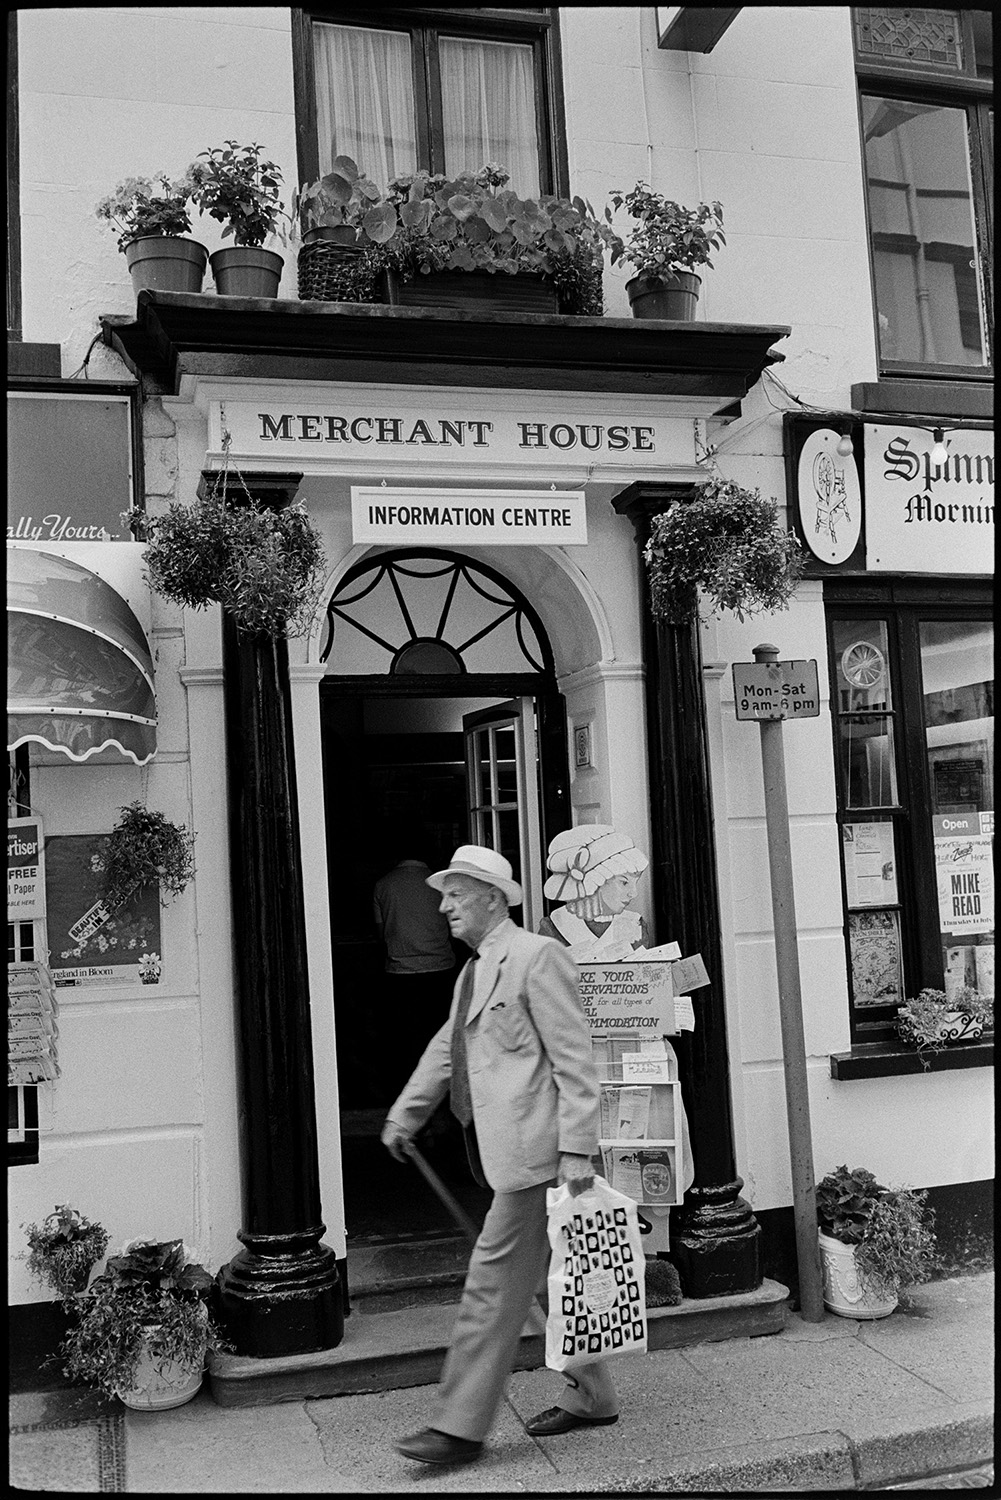 Doorways and shopfronts. 
[A man wearing a straw hat, carrying a bag and holding a walking stick, passing the entrance to the tourist information centre at Merchant House in Bideford. The doorway is decorated with plant pots and hanging baskets.]